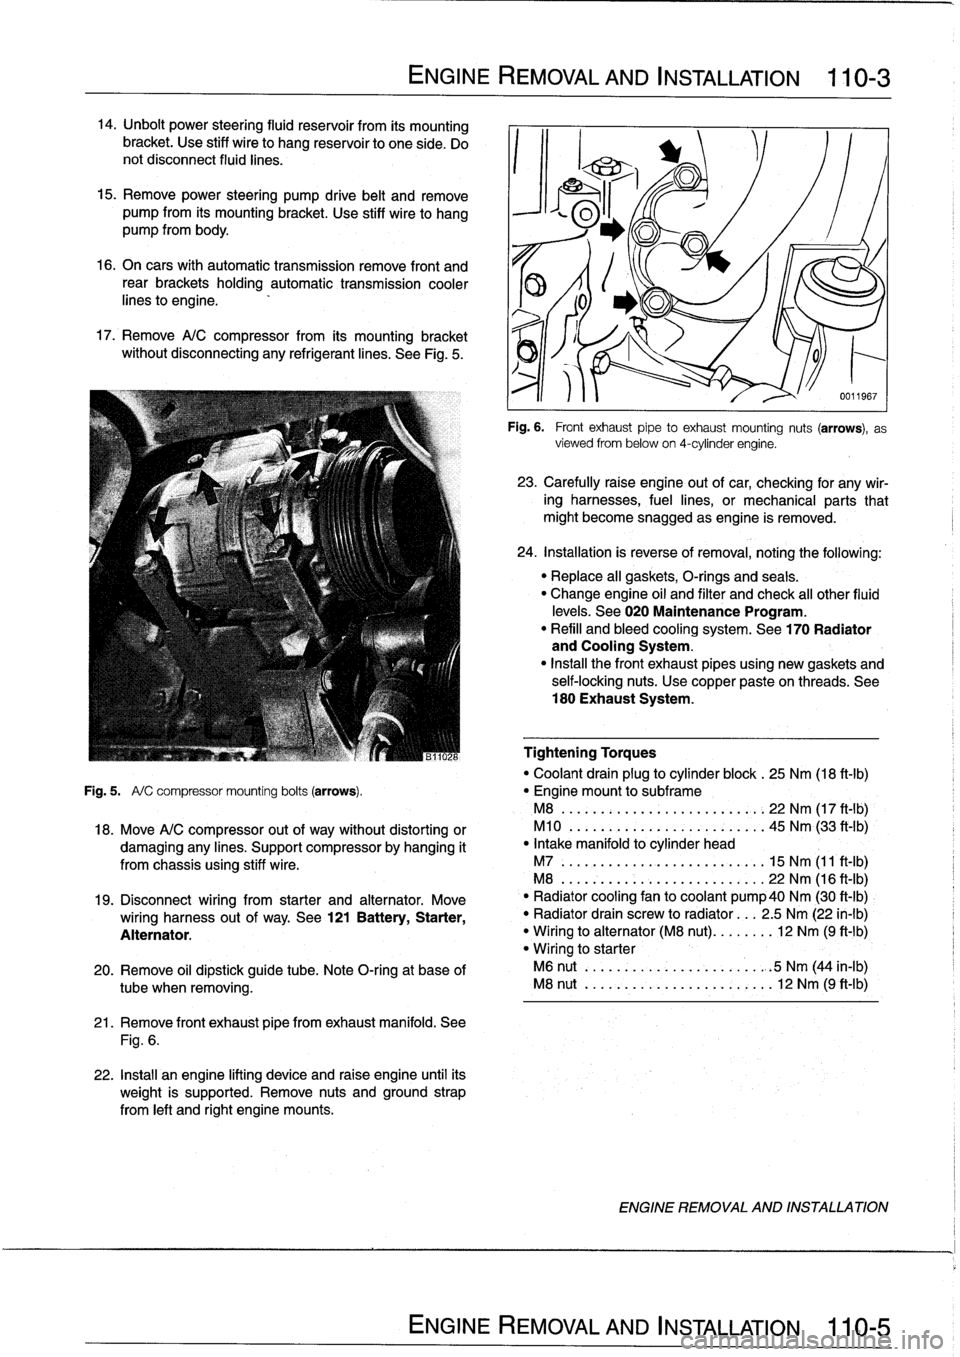 BMW 328i 1992 E36 Workshop Manual 14
.
Unbolt
power
steering
fluid
reservoir
from
íts
mounting
bracket
.
Use
stiff
wire
to
hang
reservoir
to
one
side
.
Do
not
disconnect
fluid
lines
.

15
.
Remove
power
steering
pump
drive
belt
and
r